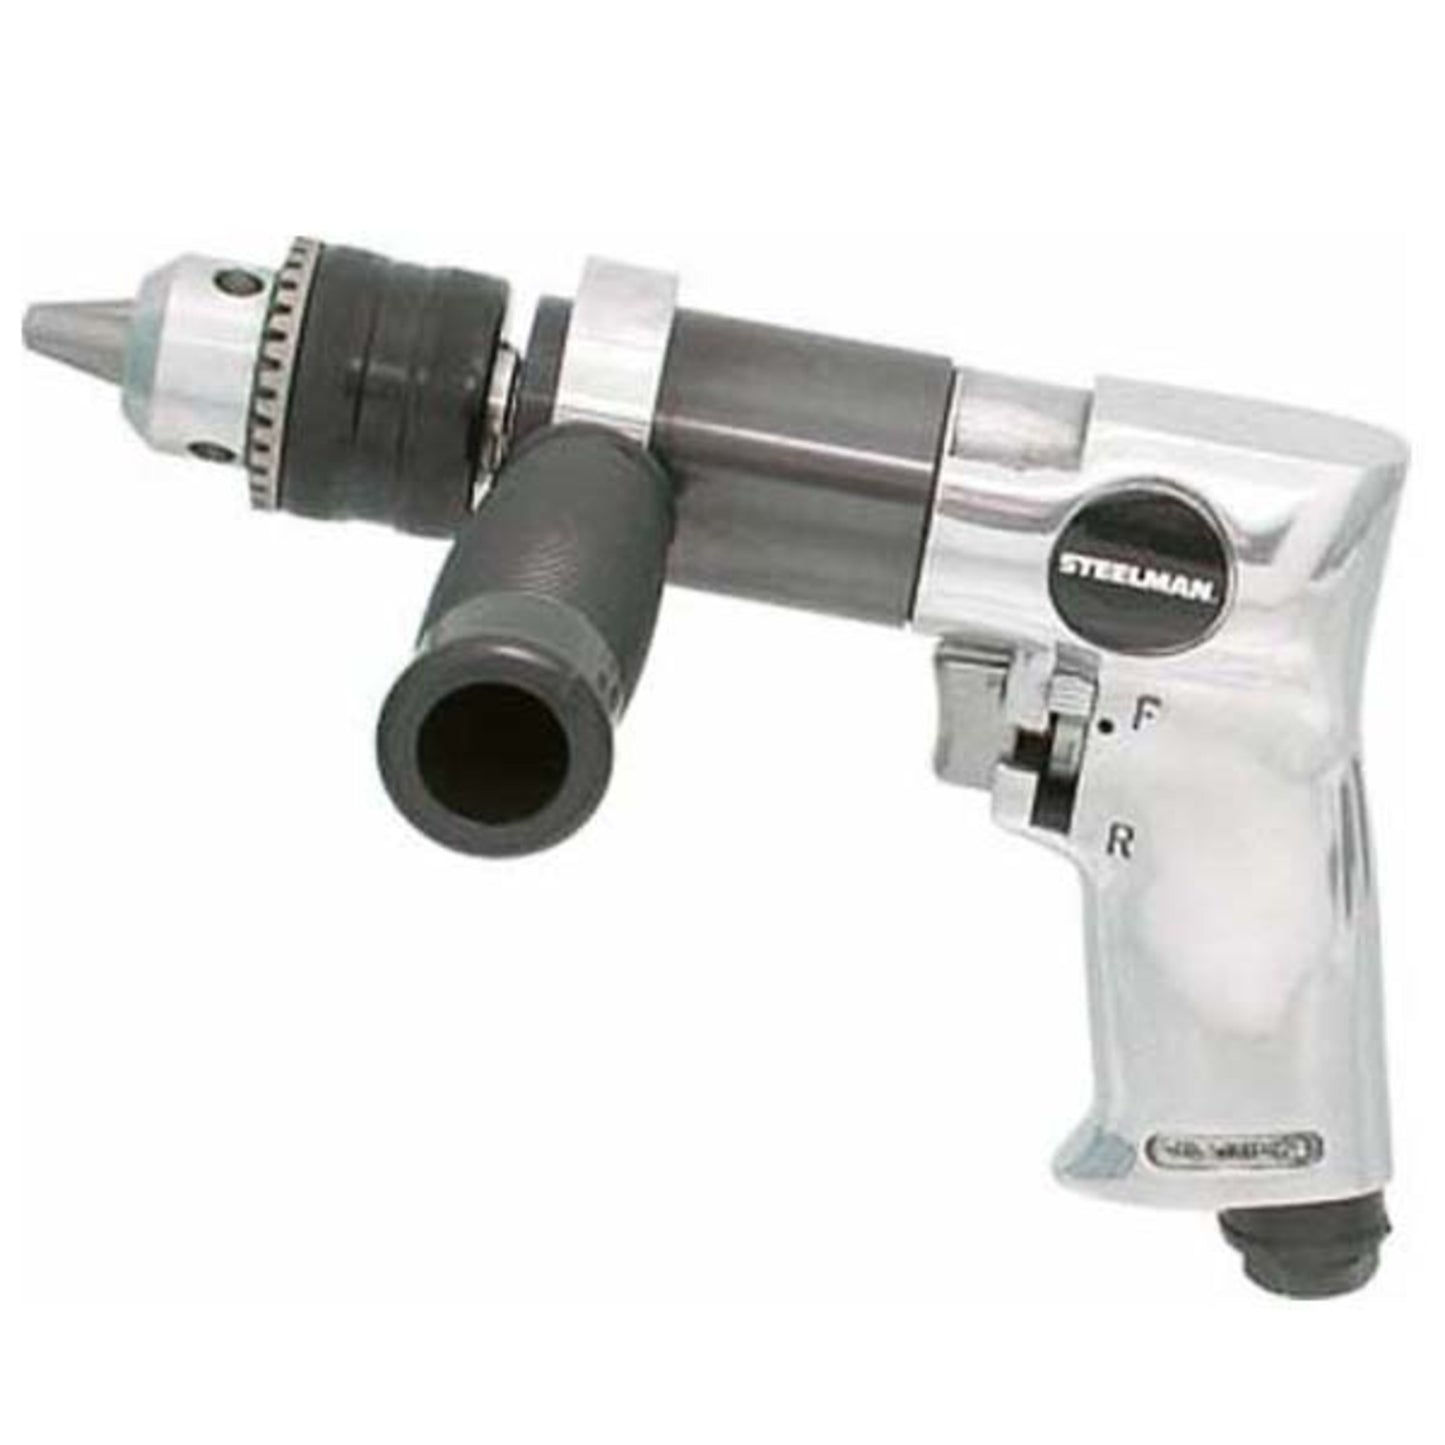 1/2-Inch Reversible Air Drill